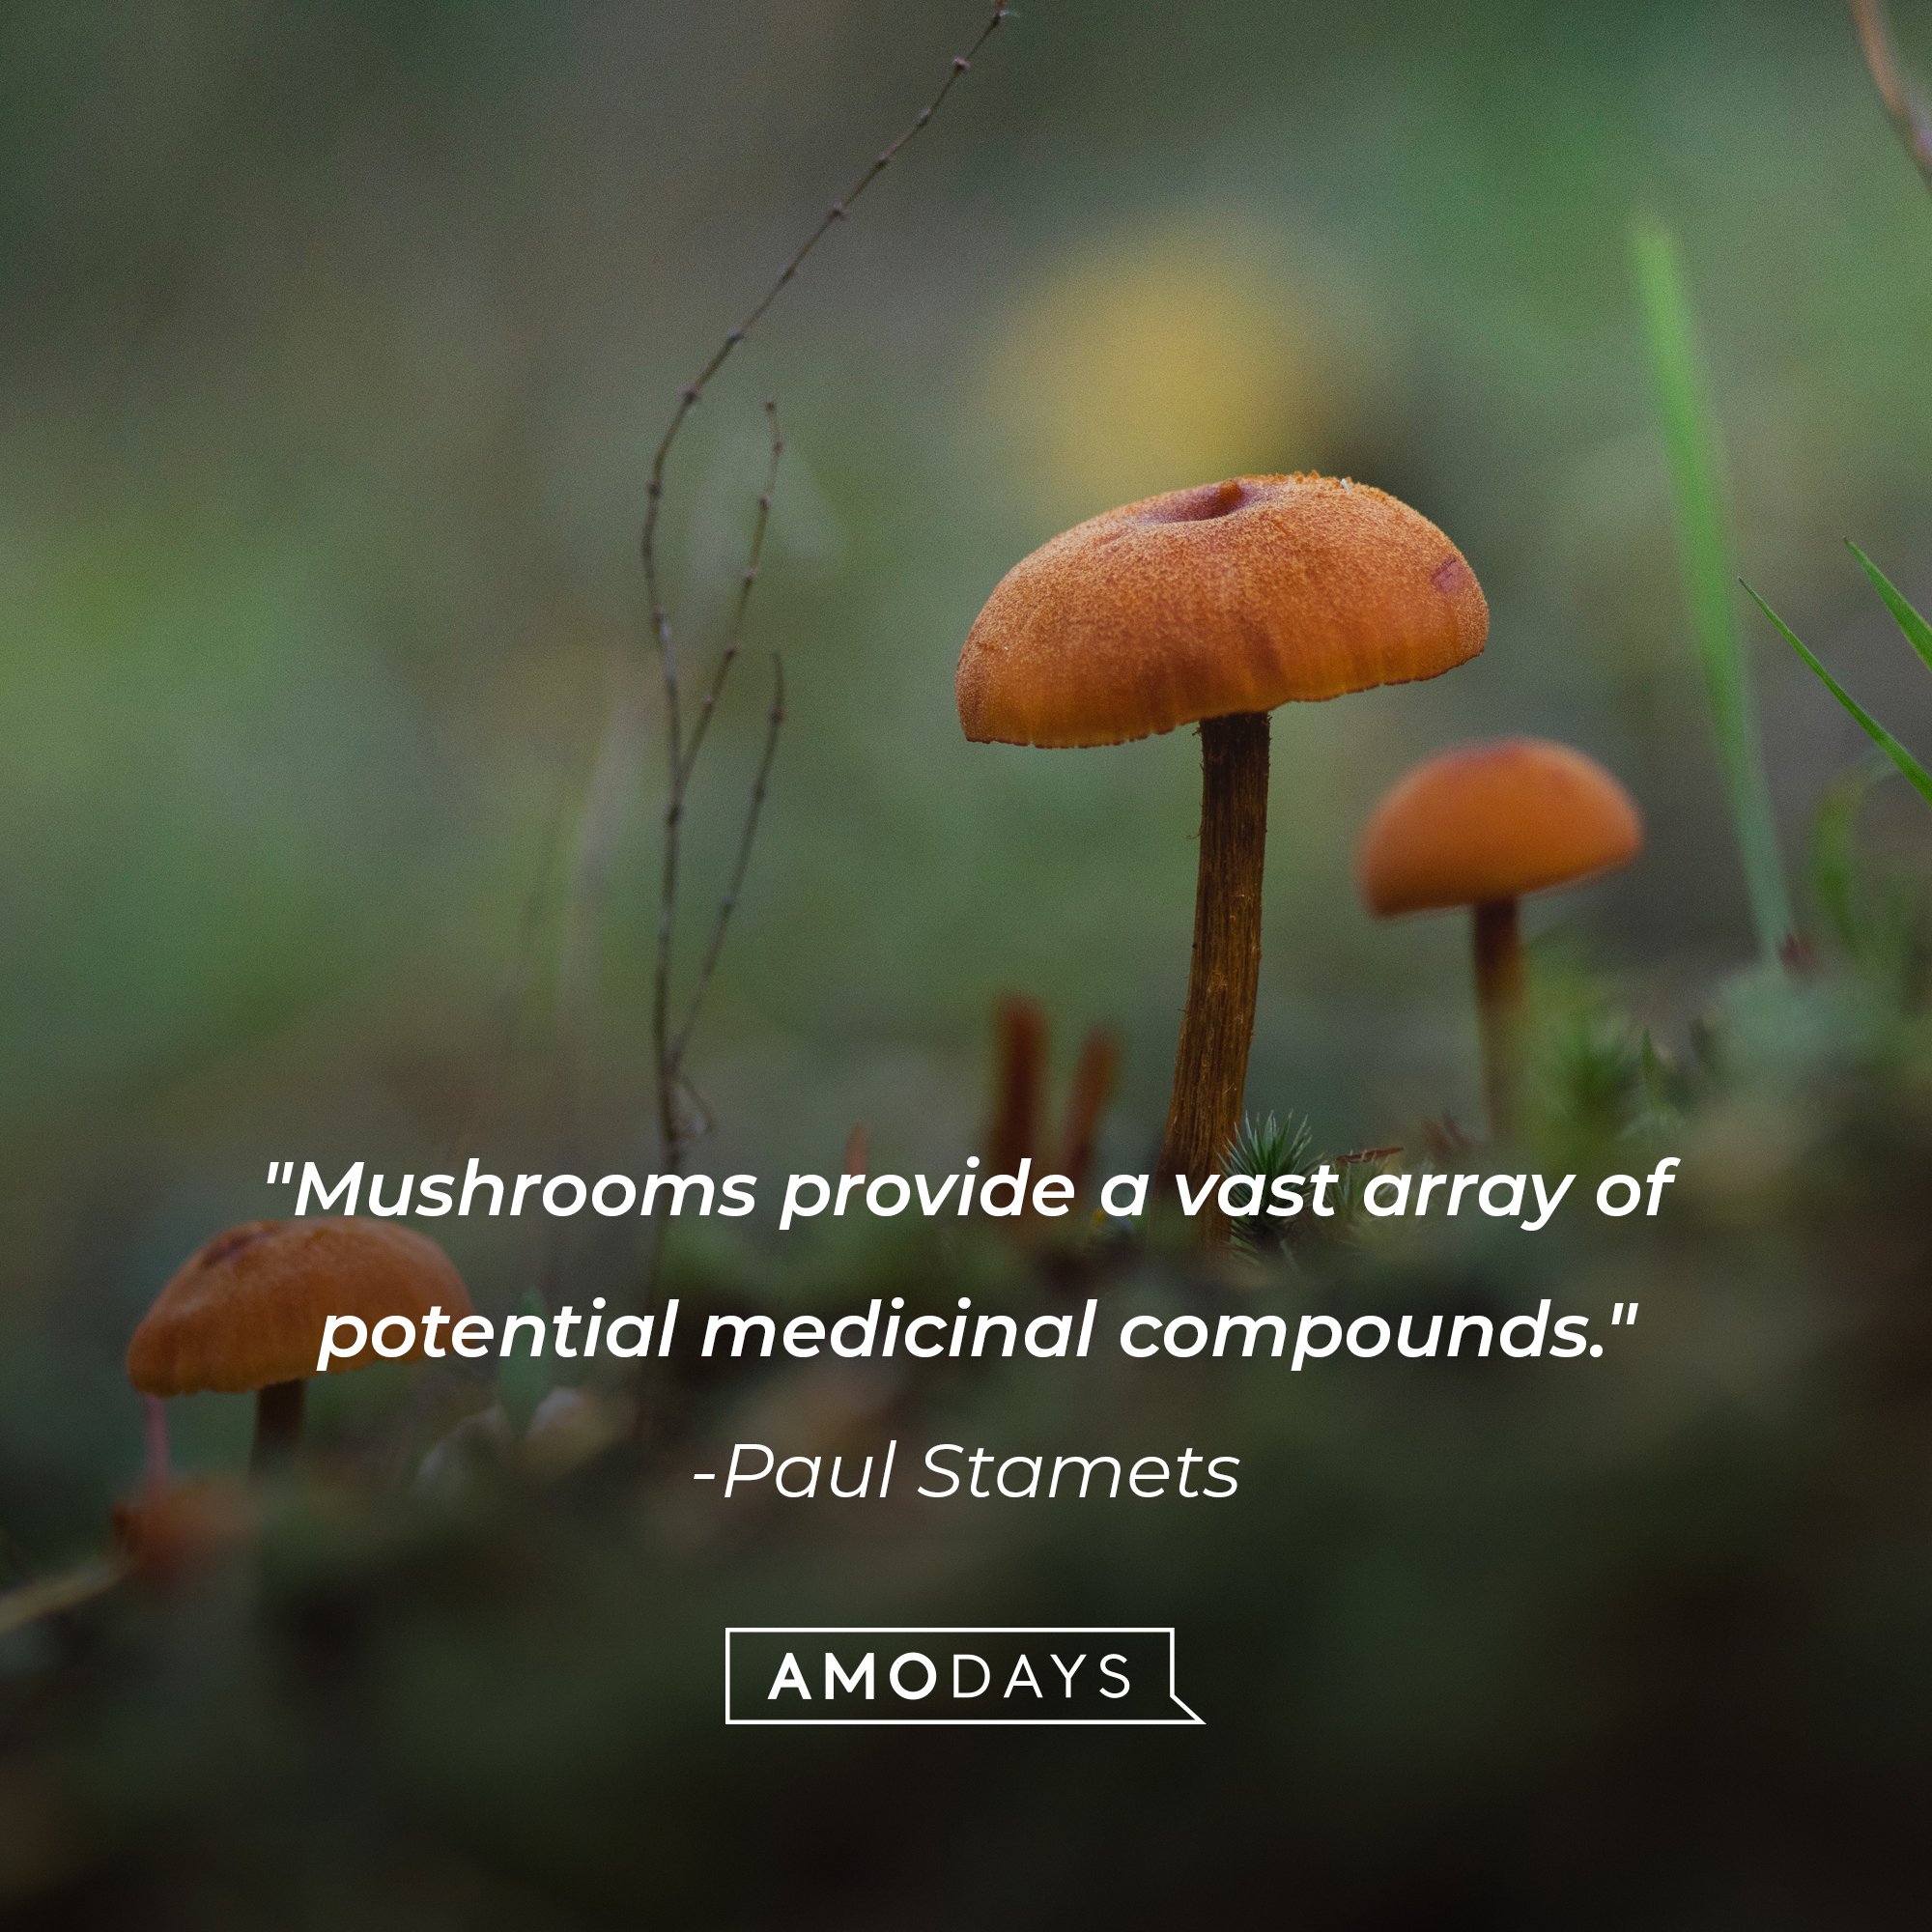 Paul Stamets’ quote: "Mushrooms provide a vast array of potential medicinal compounds." | Image: AmoDays